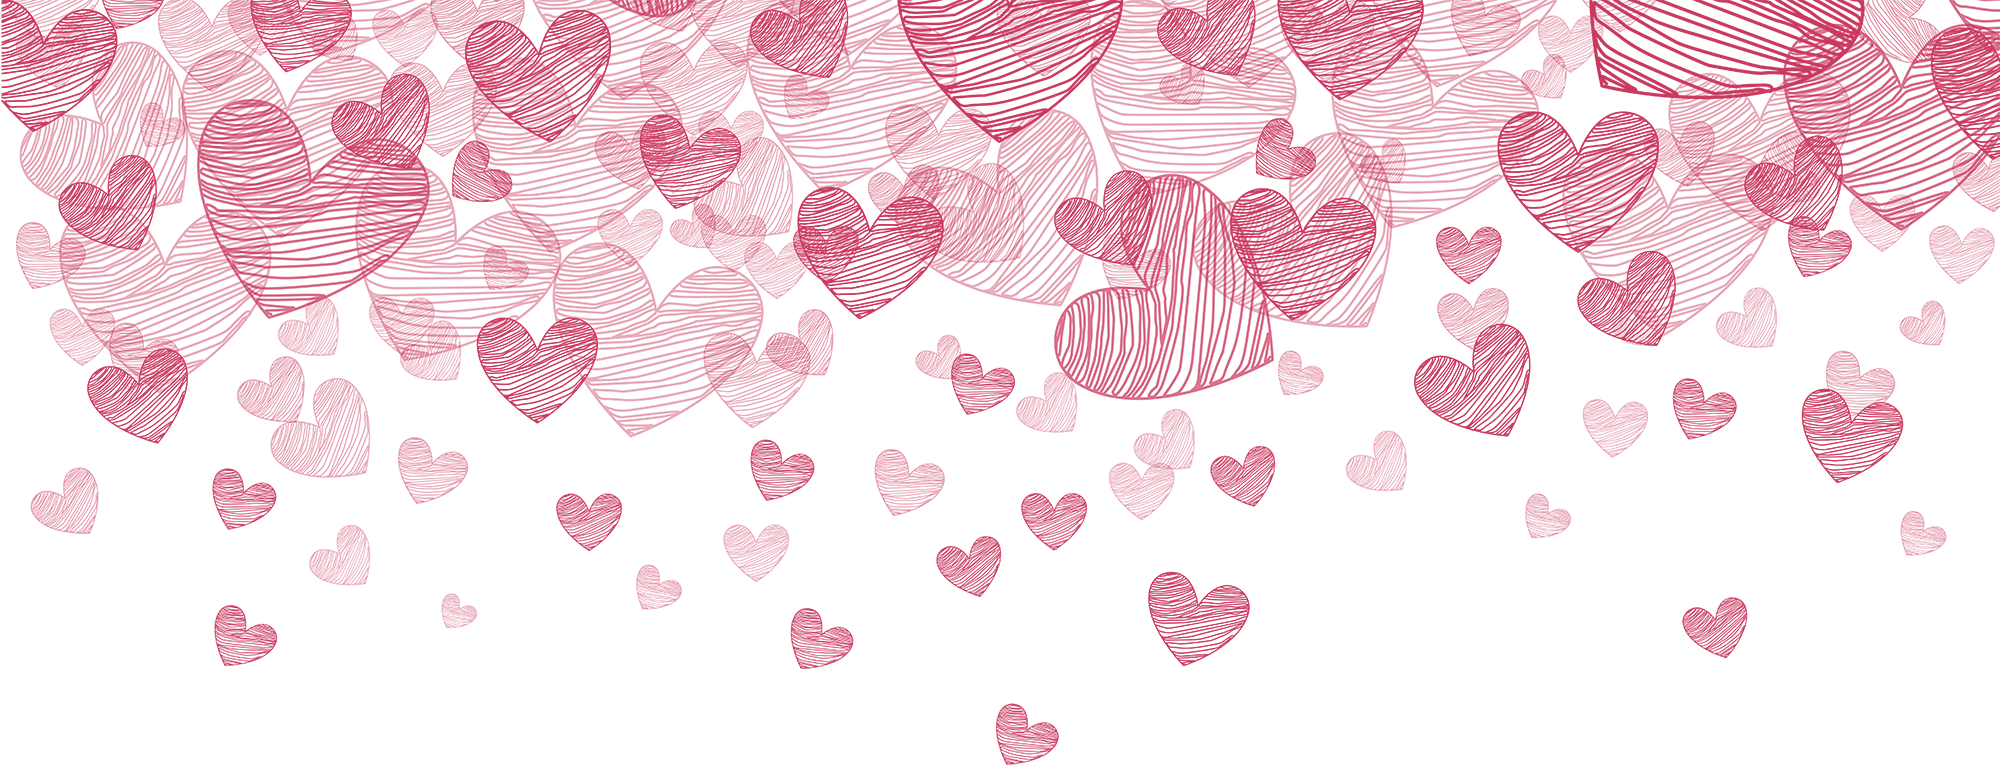 Valentine Hearts 02 02 Png Quality